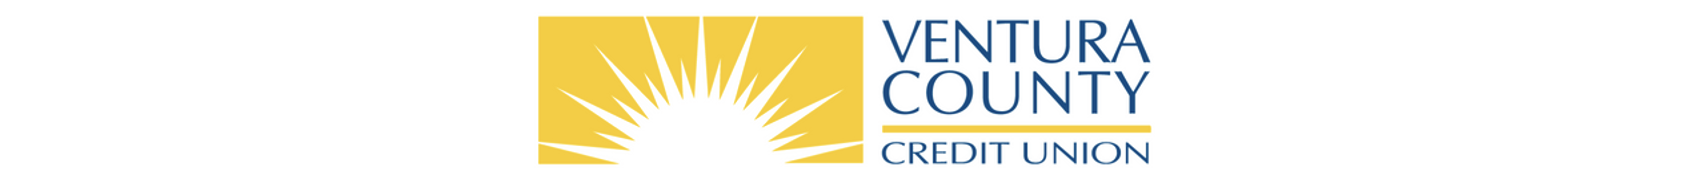 Ventura County Credit Union homepage – opens in a new window